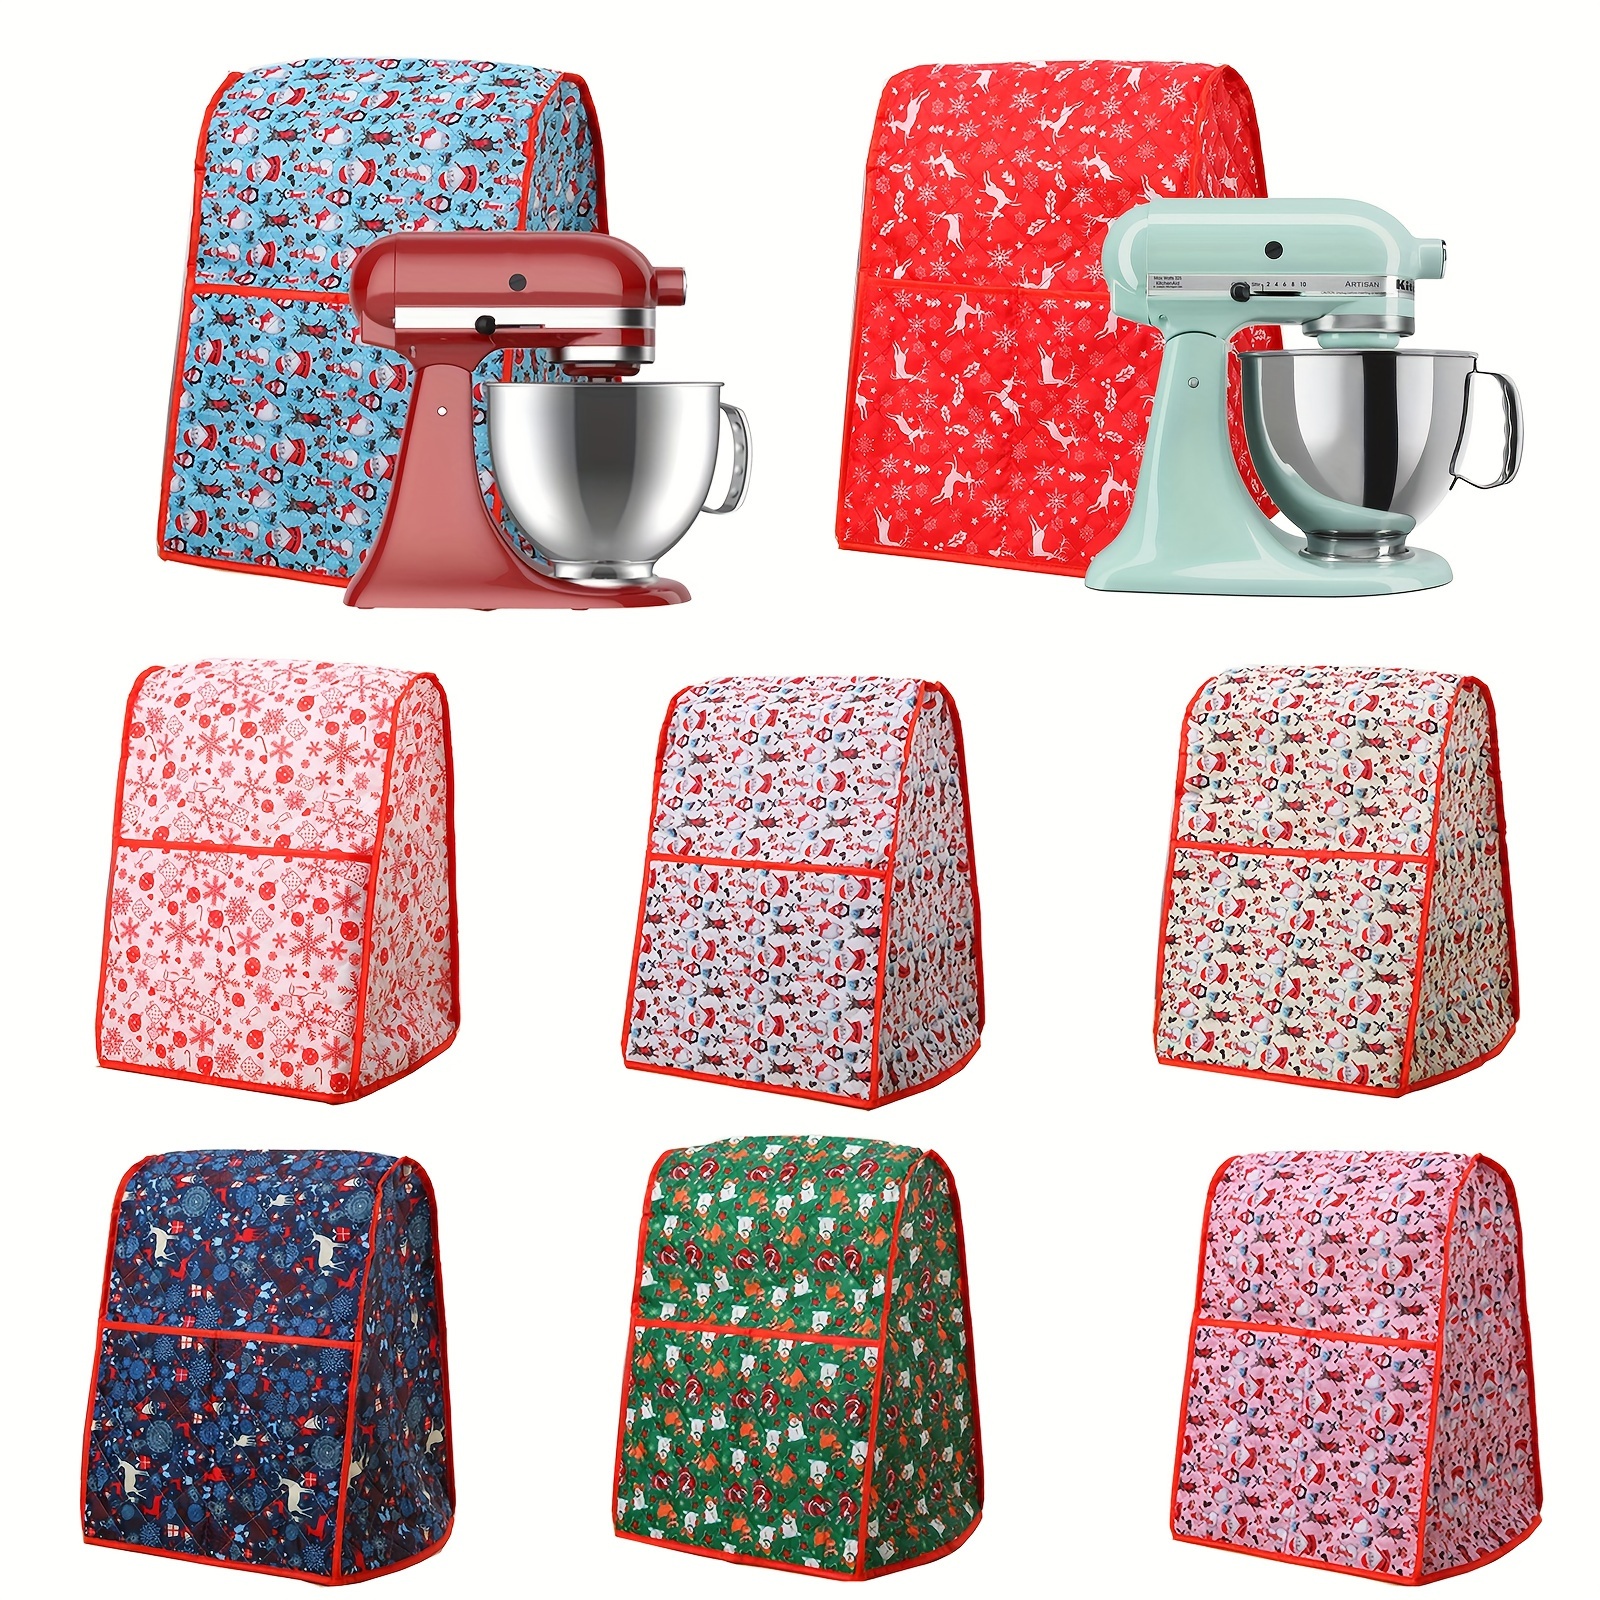 Dodoing Toaster Cover, Kitchen Small Appliance Cover, Universal Size Microwave Oven Dustproof Cover for 2 Slice Toaster, Red